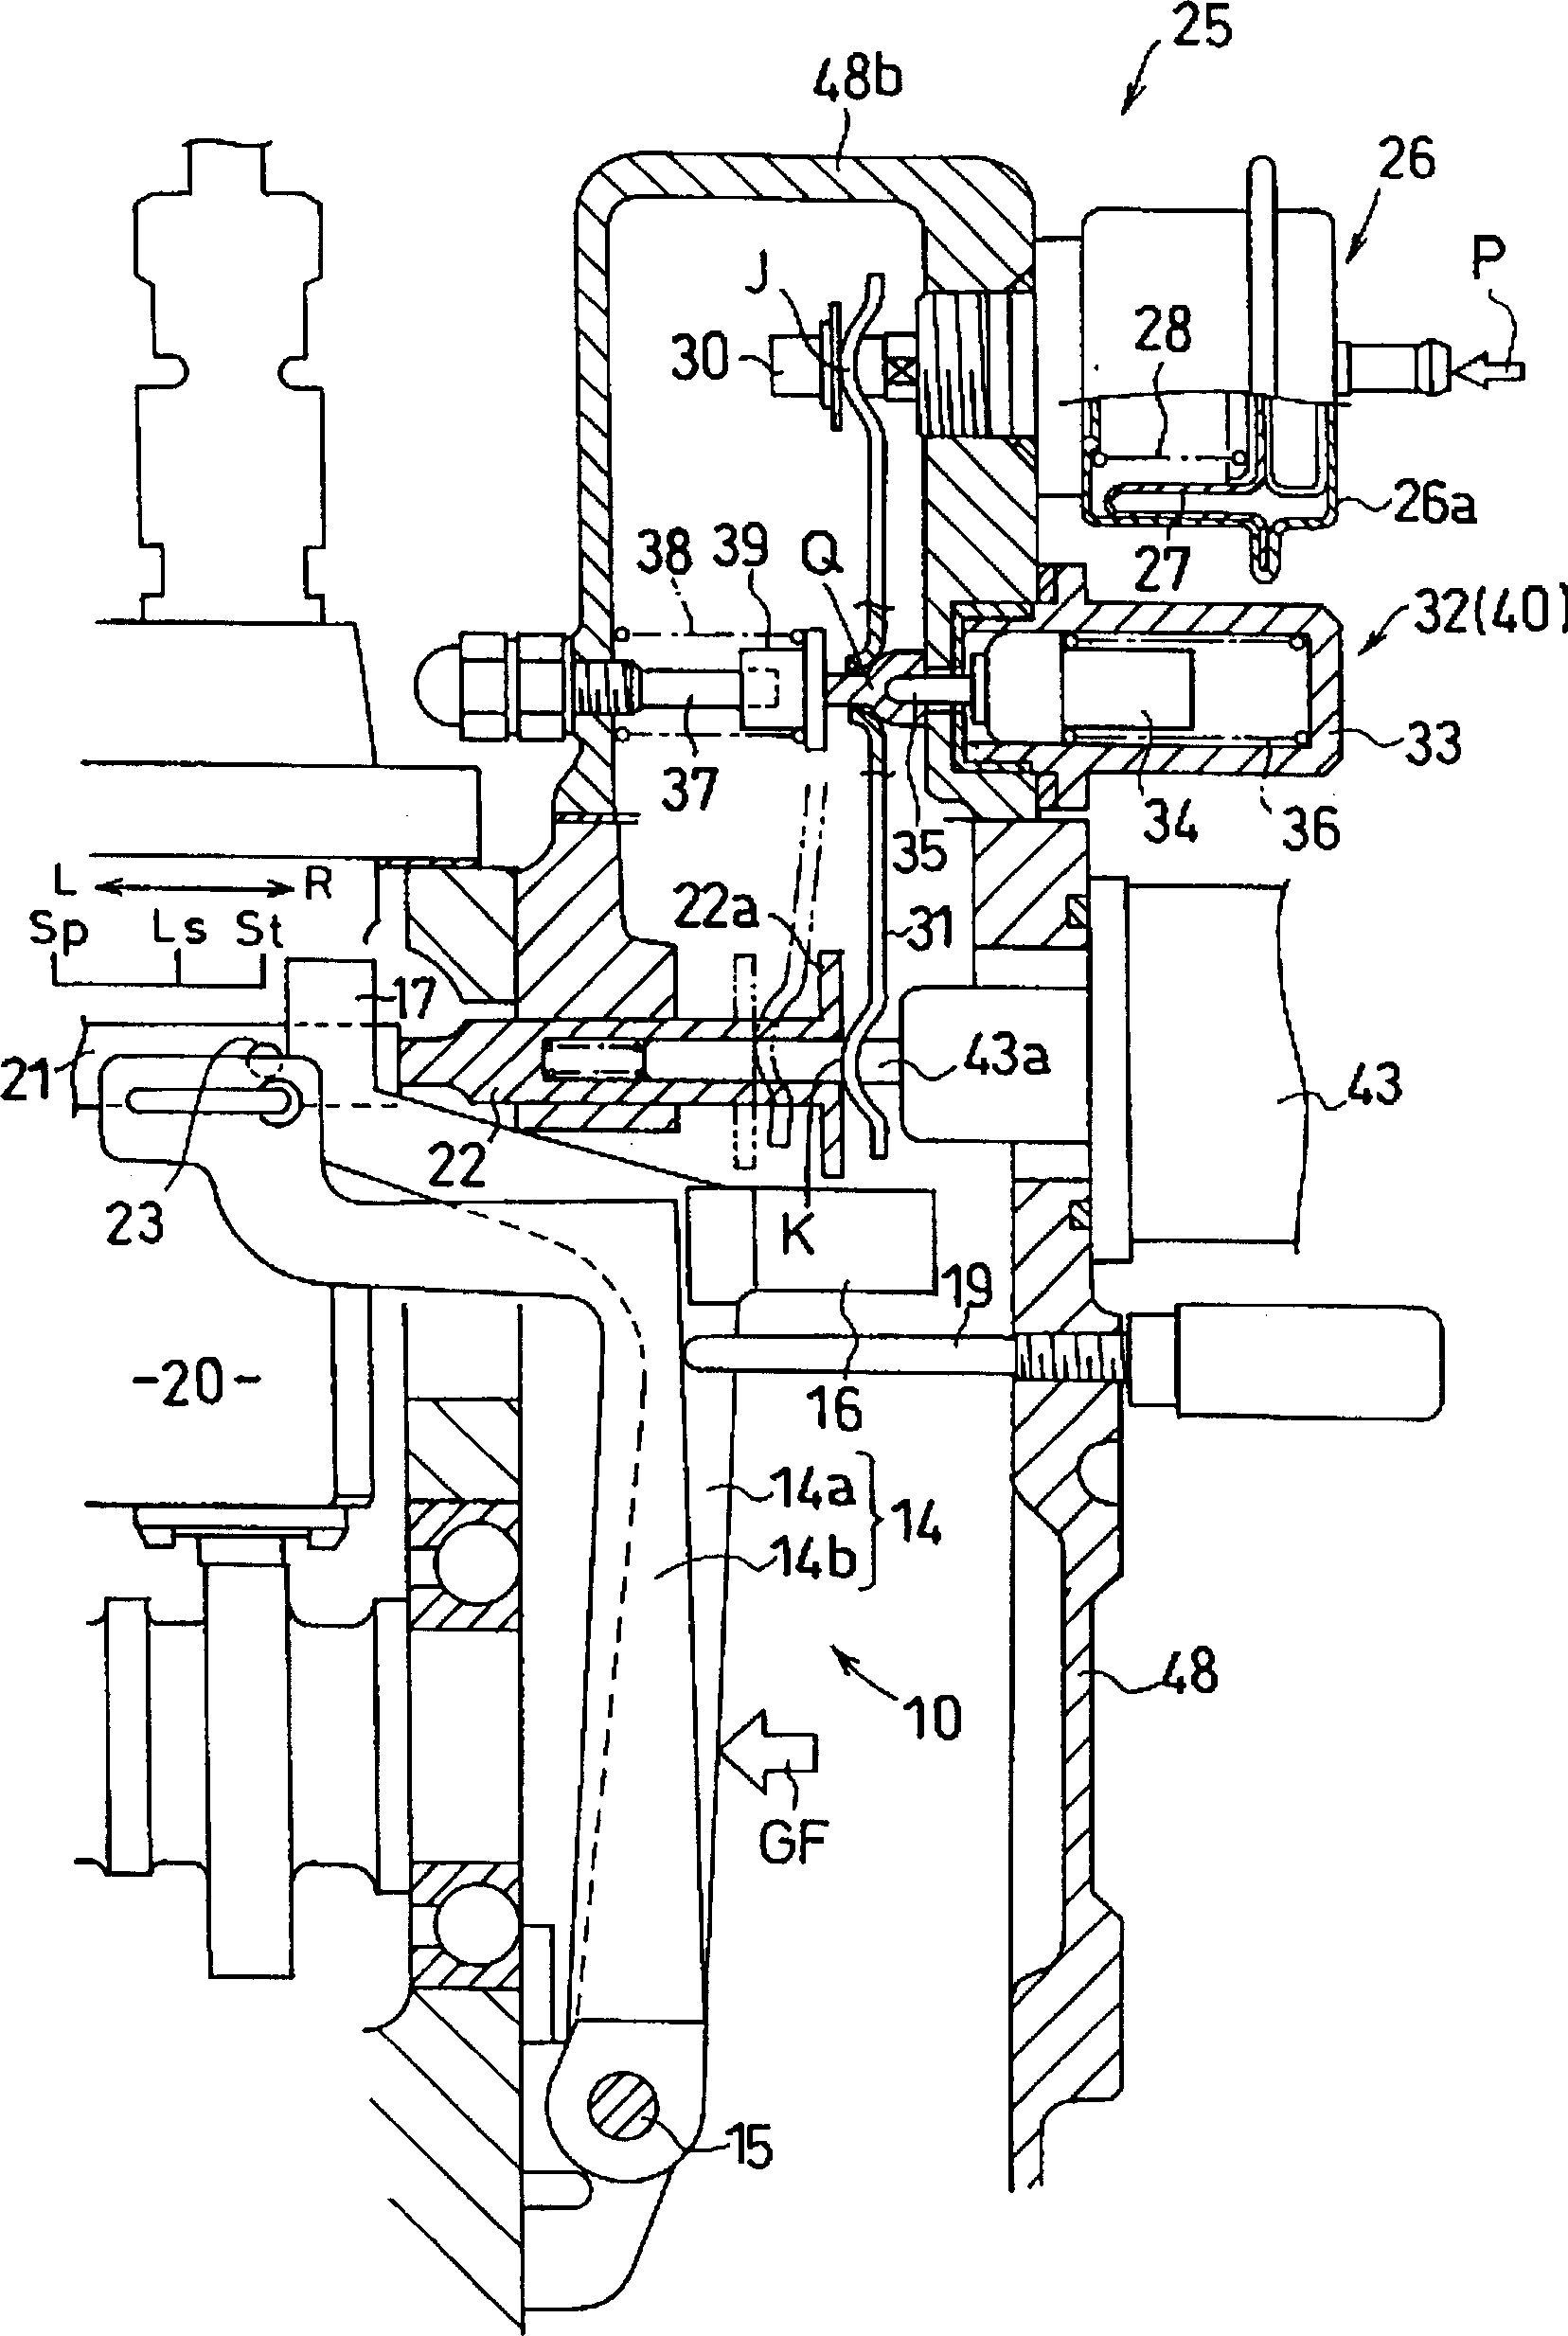 Fuel-limiting device for engine with supercharger